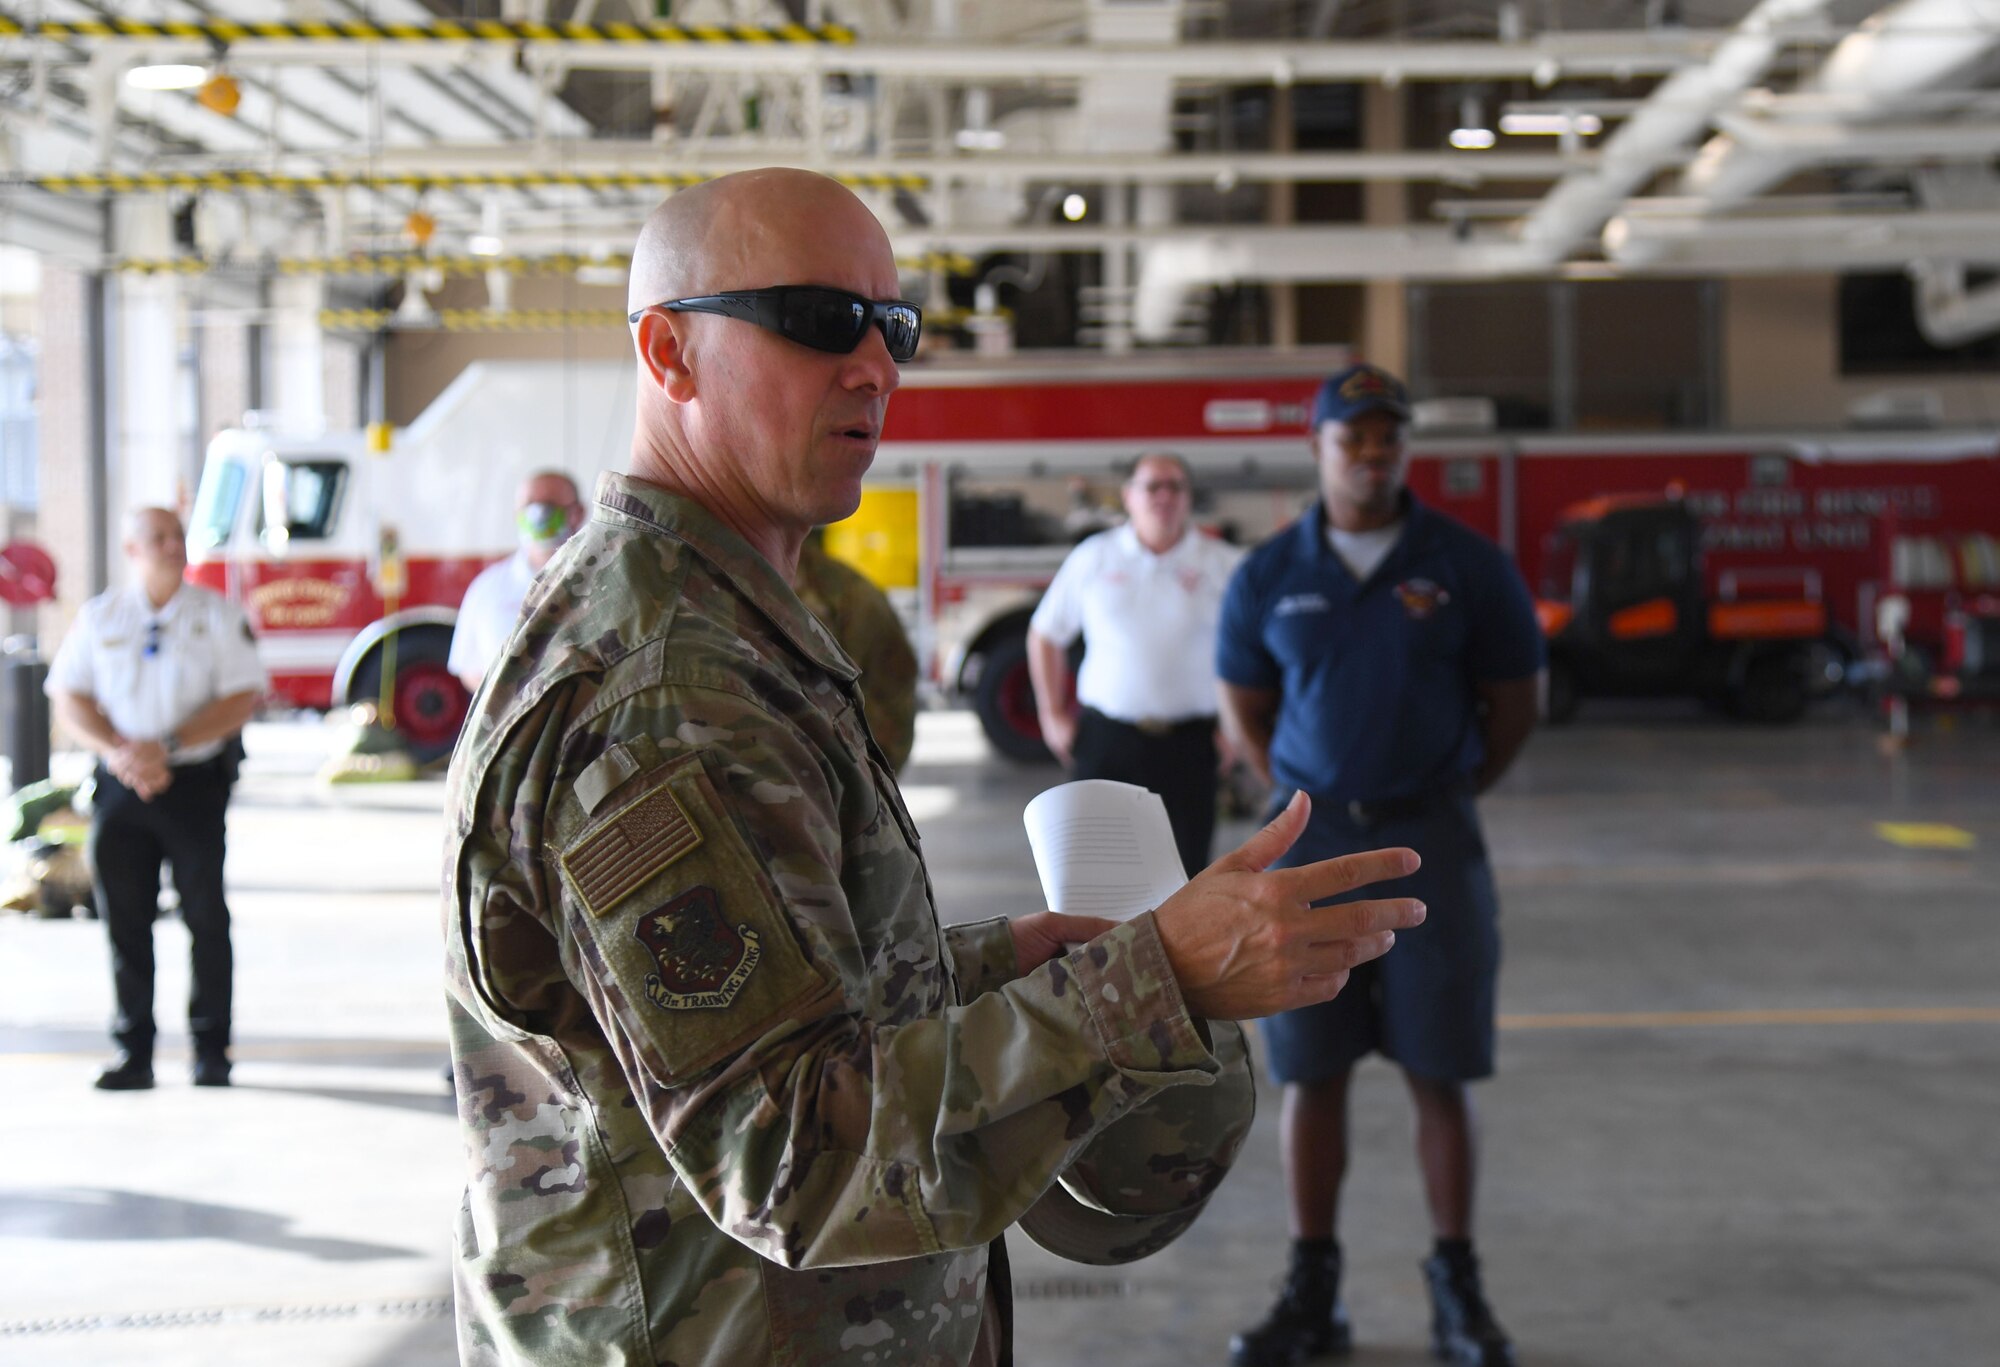 U.S. Air Force Col. William Hunter, 81st Training Wing commander, tours the Keesler Fire Department during an 81st Mission Support Group immersion tour at Keesler Air Force Base, Mississippi, June 24, 2021. The purpose of the tour was to become more familiar with Keesler's mission. (U.S. Air Force photo by Kemberly Groue)